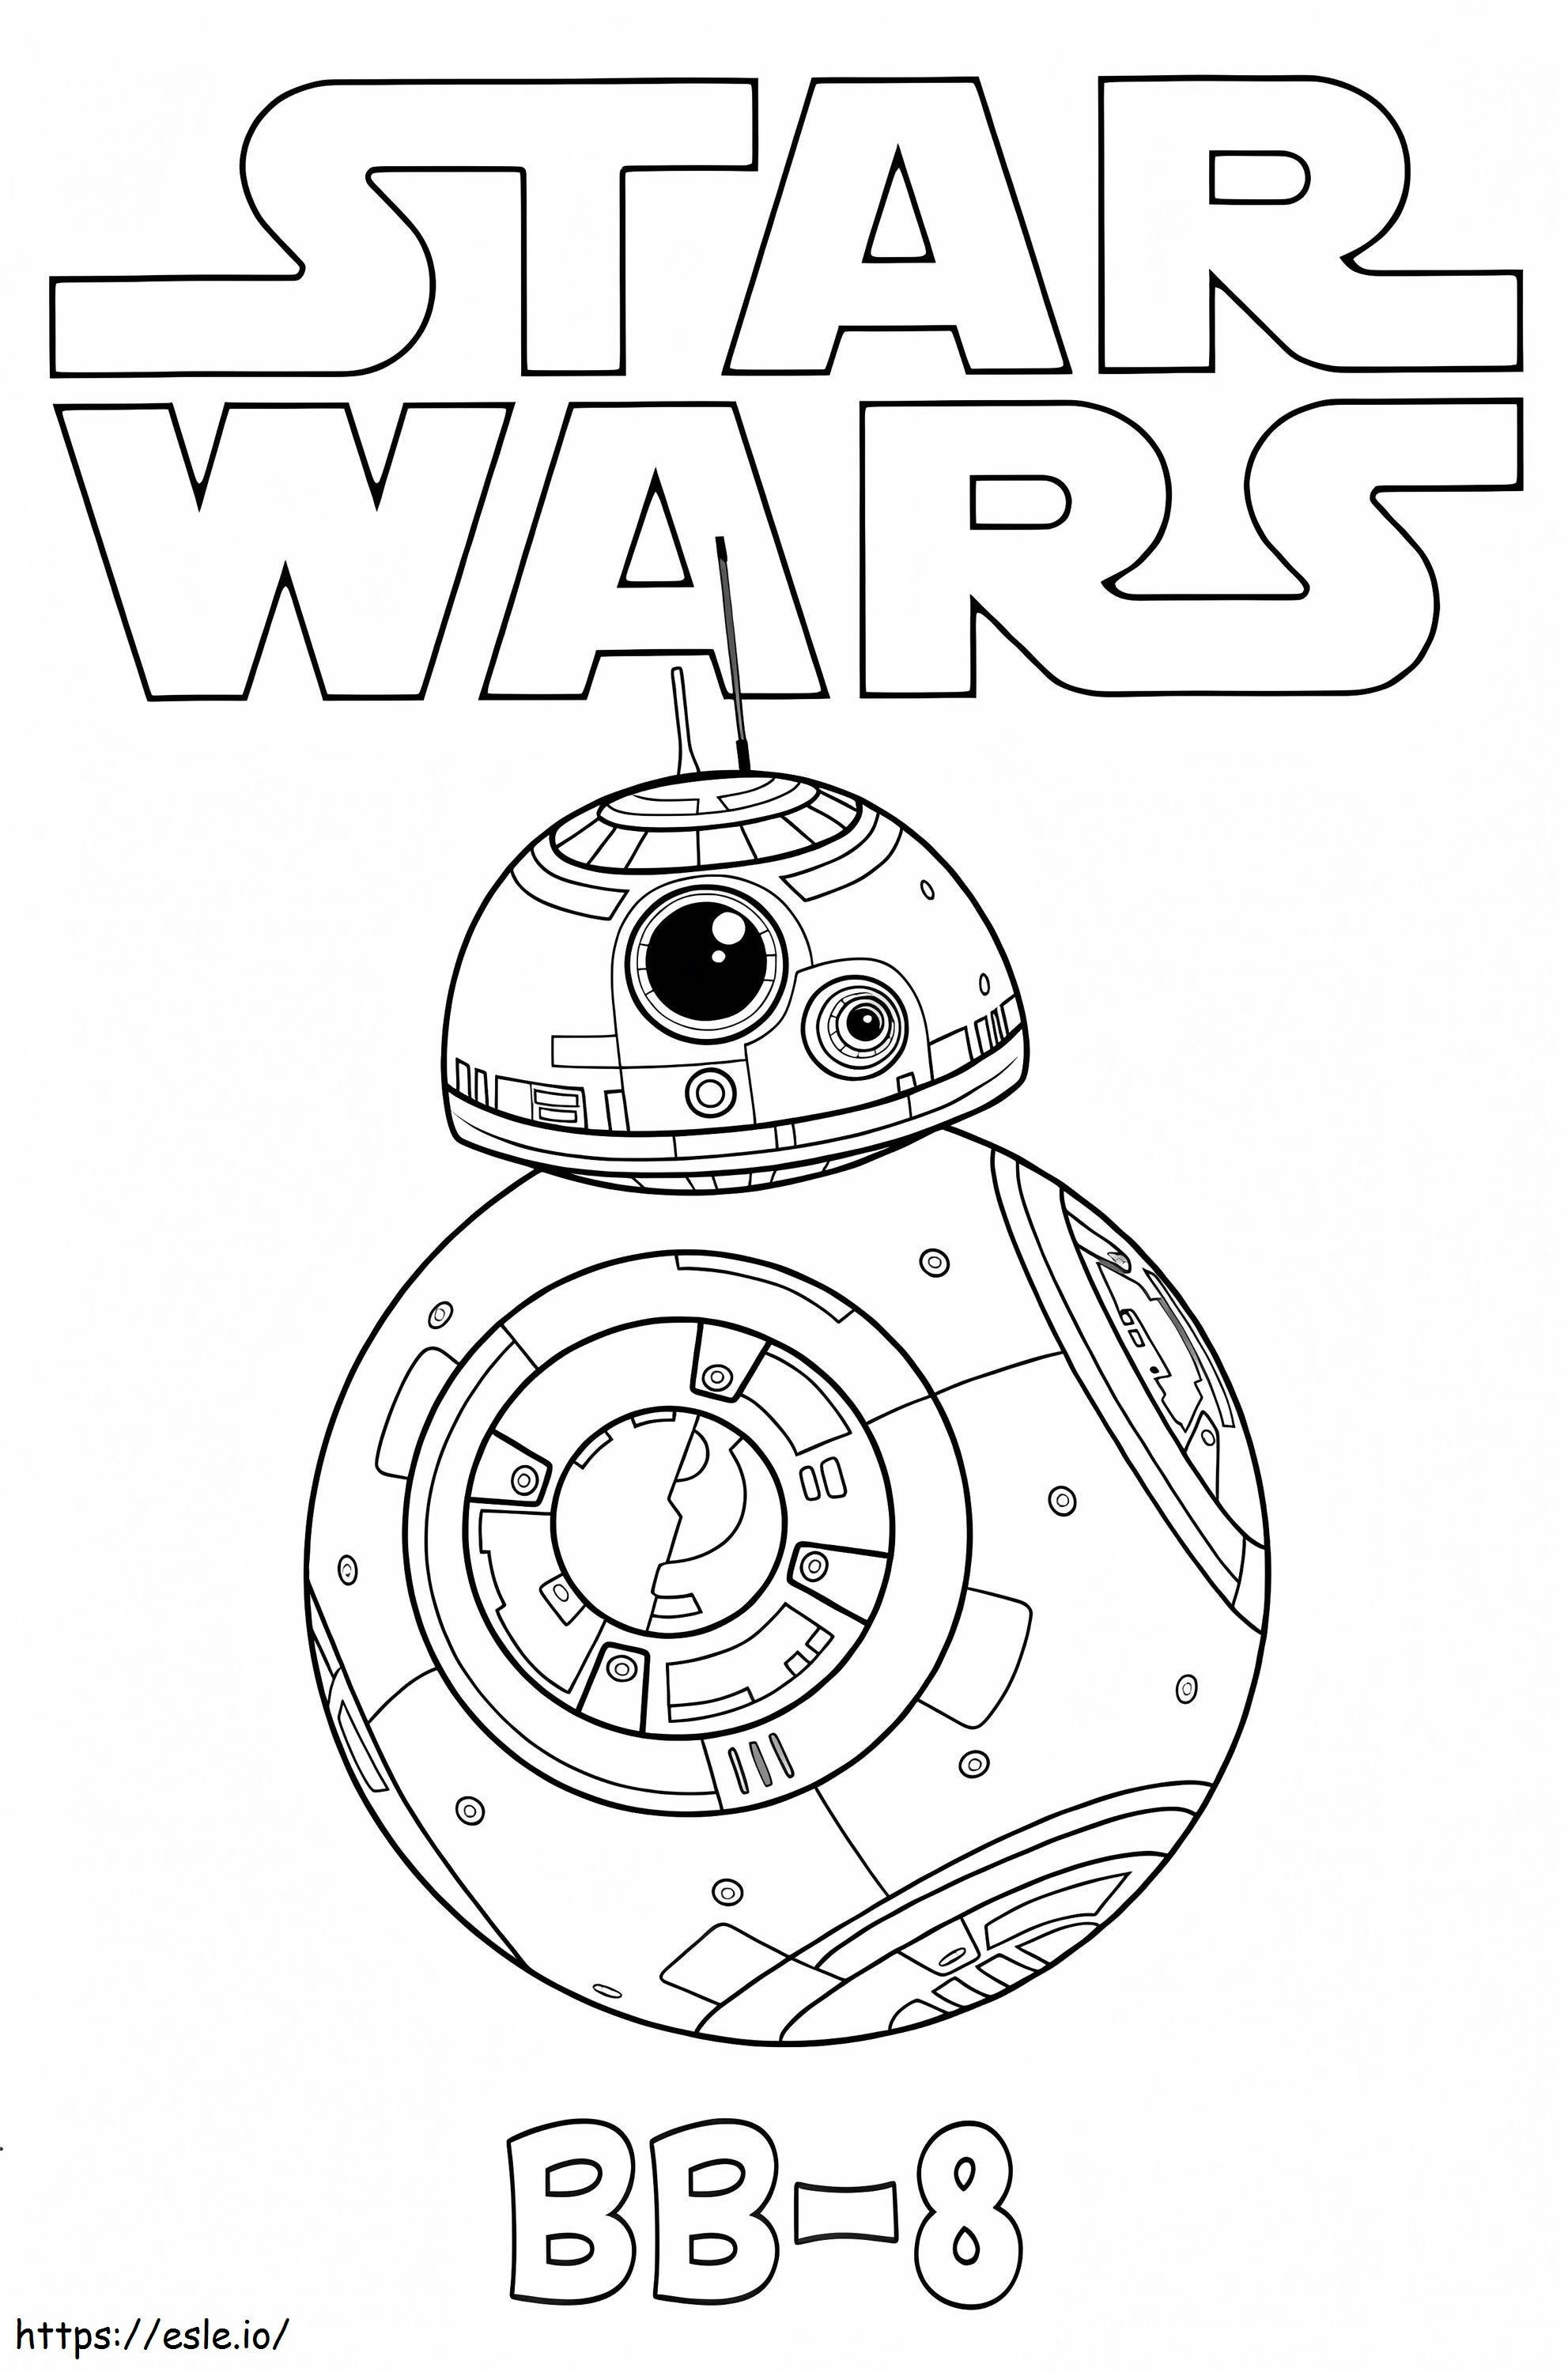 Star Wars BB 8 coloring page